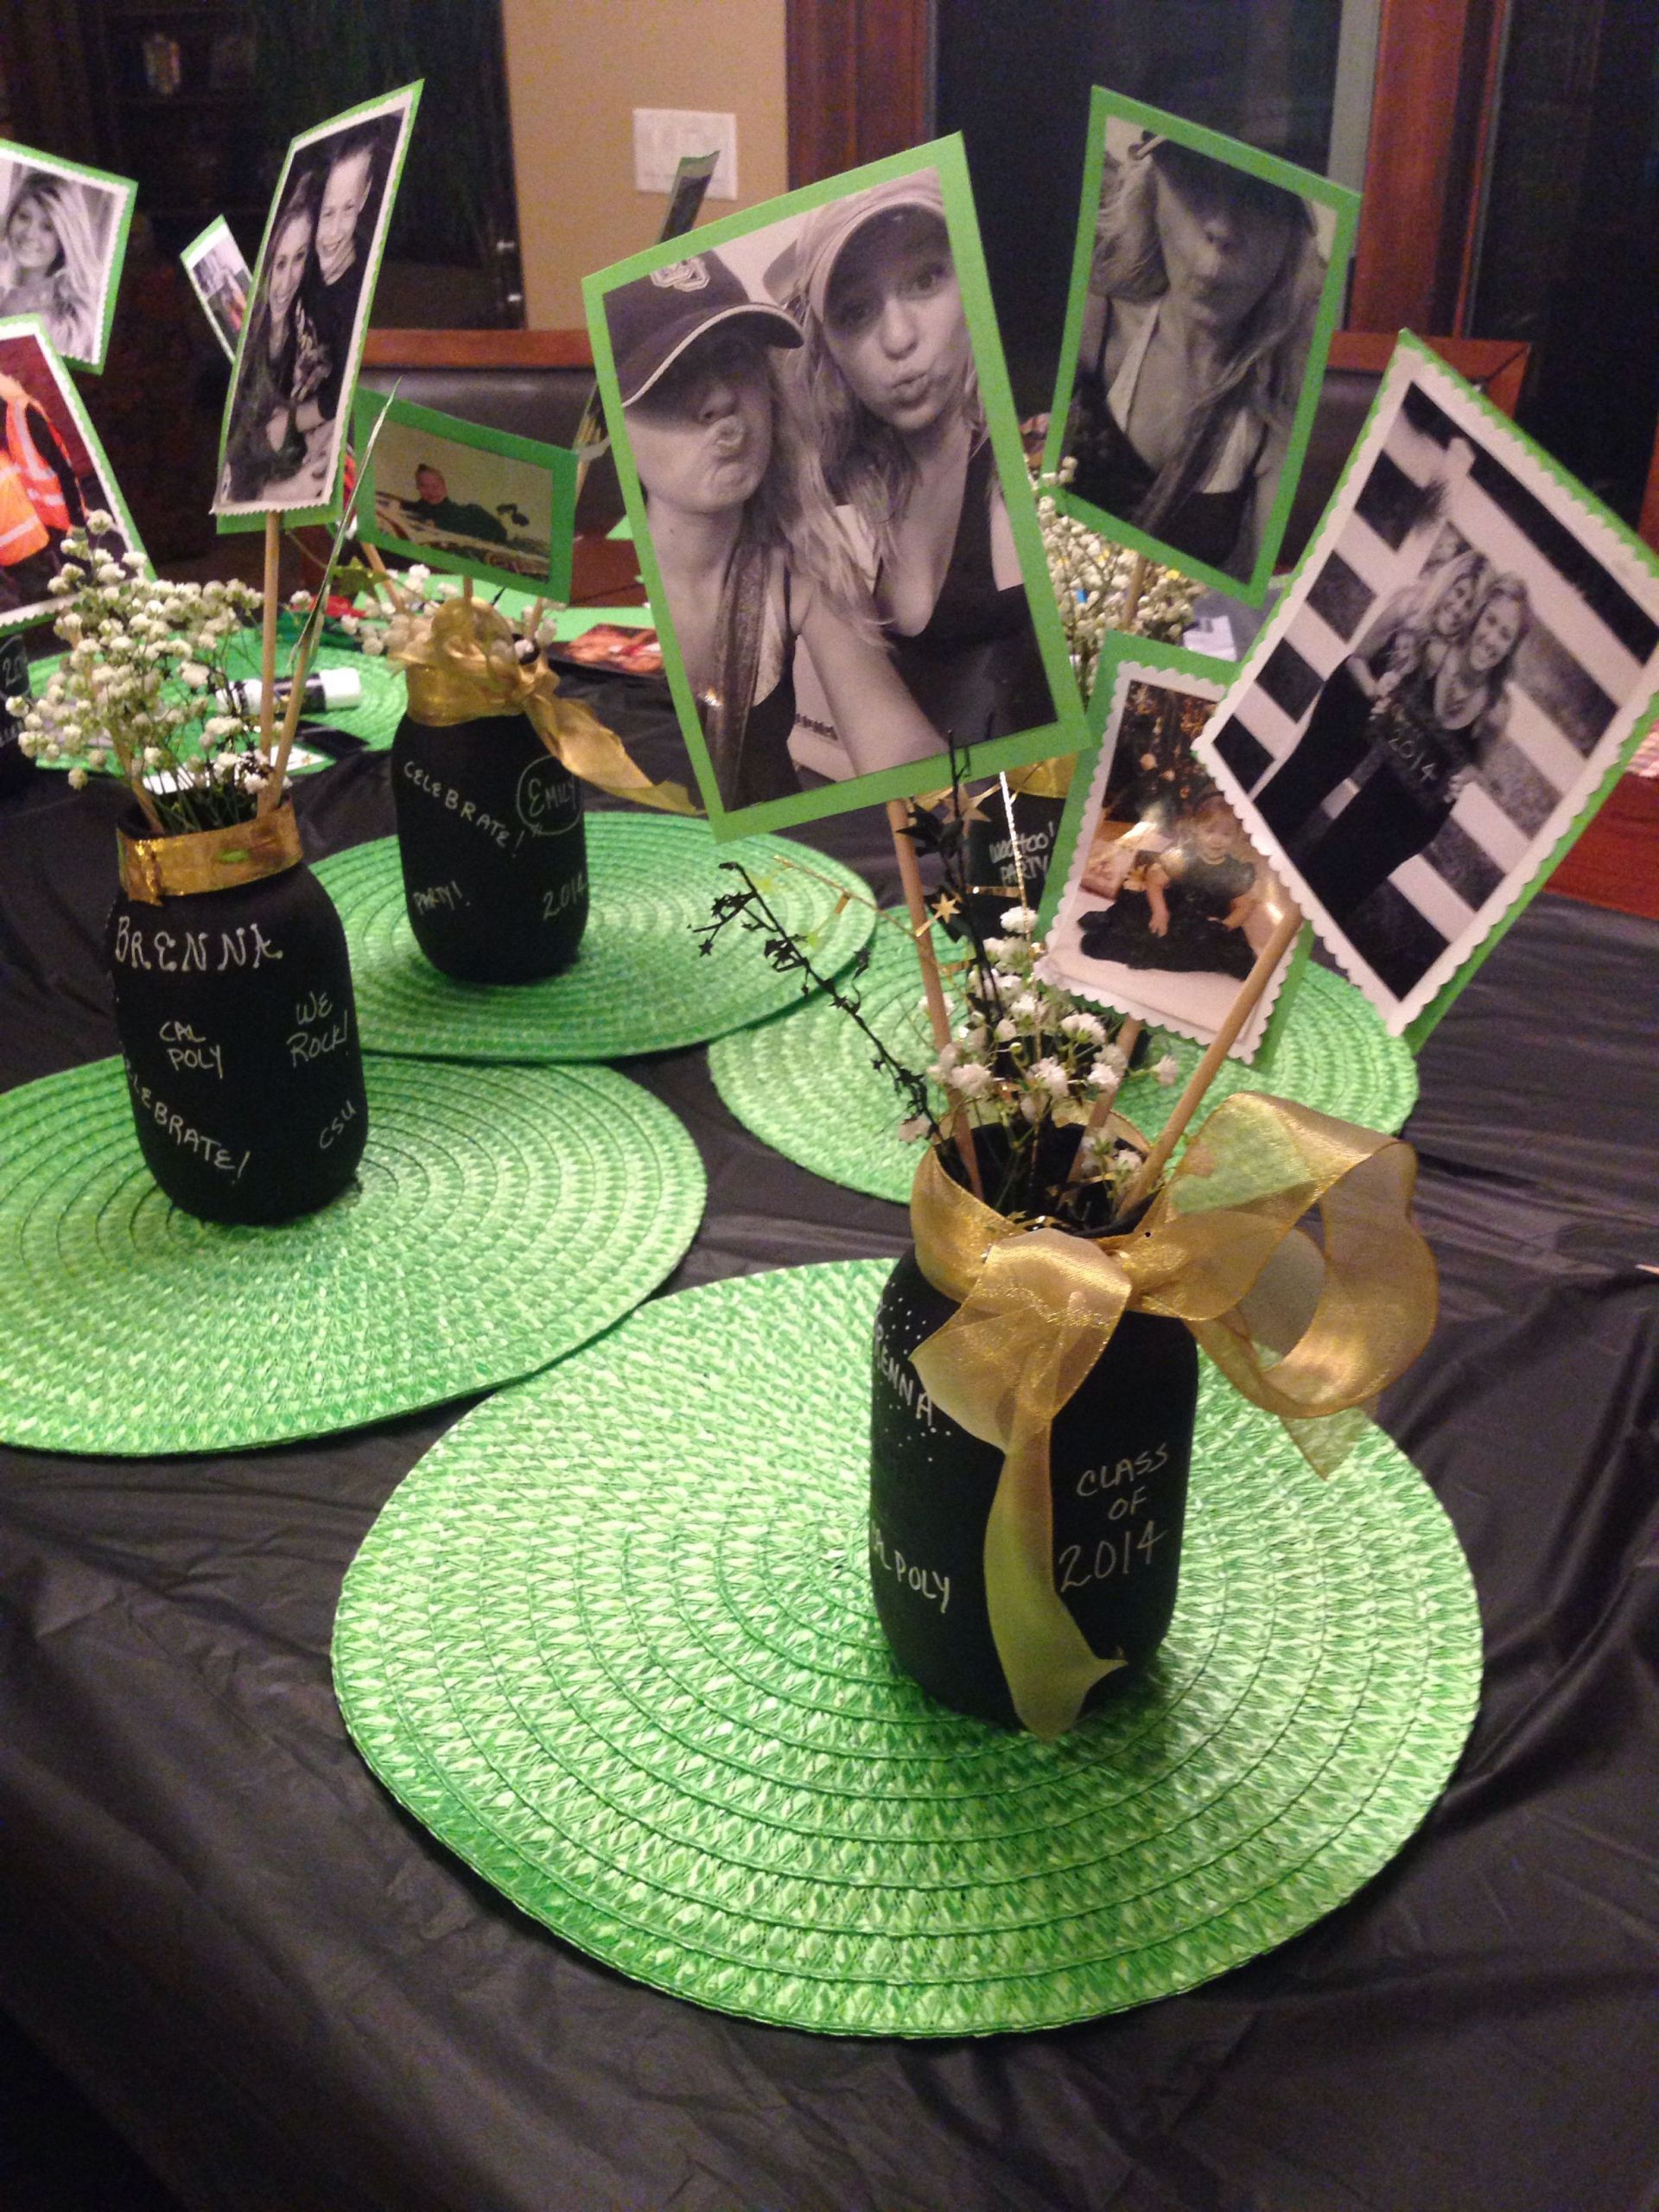 35 Of the Best Ideas for College Graduation Party Ideas for Guys - Home ...